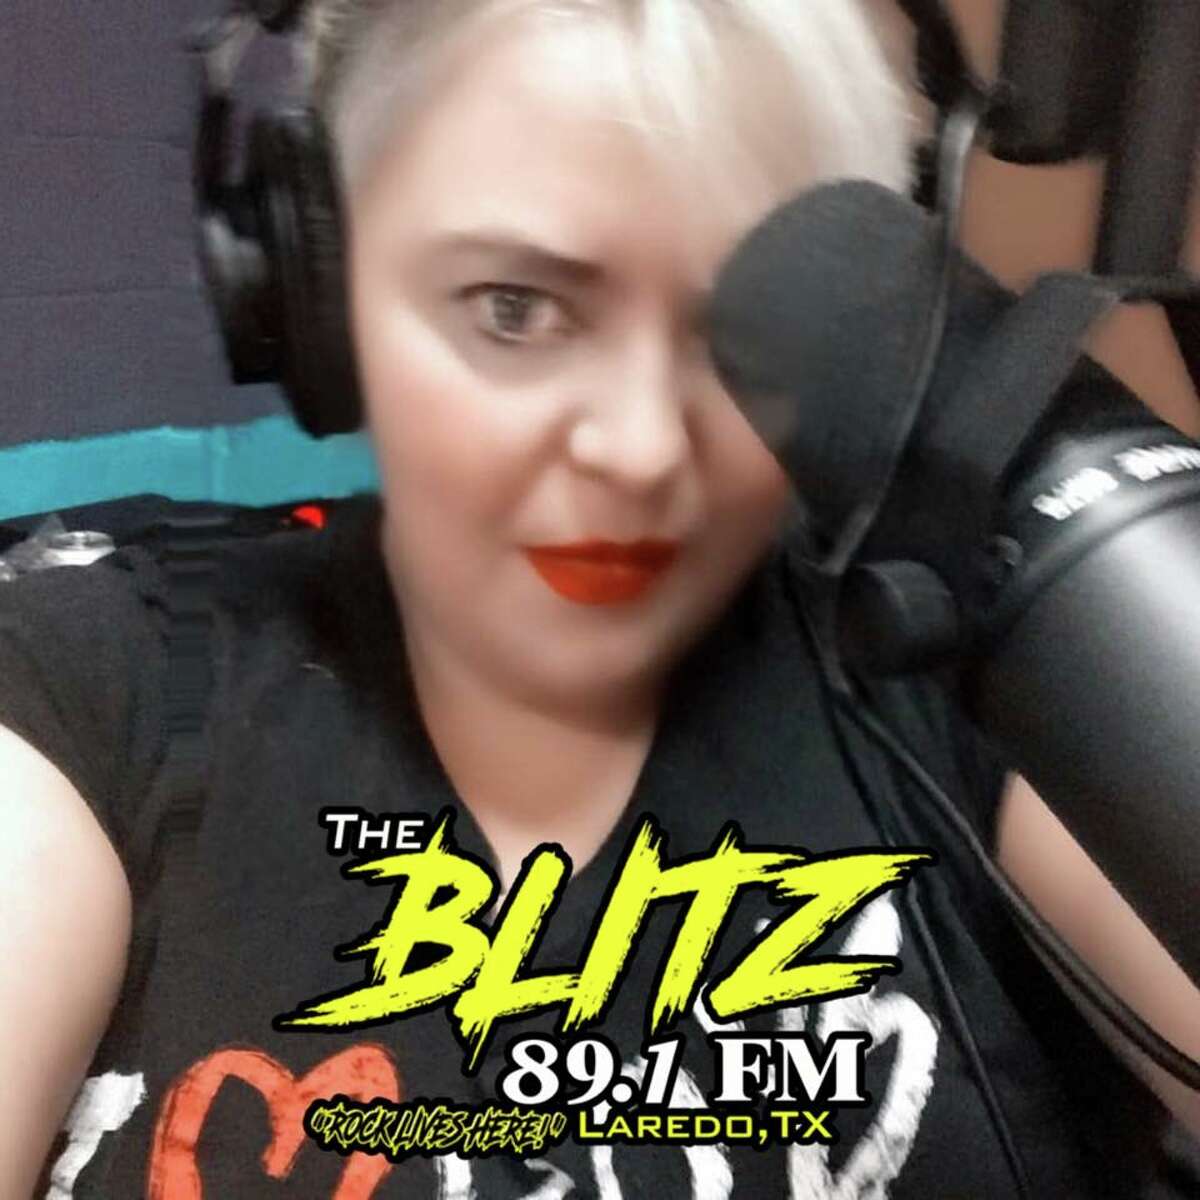 Name: Starr Murphy Station: The BLITZ 89.1